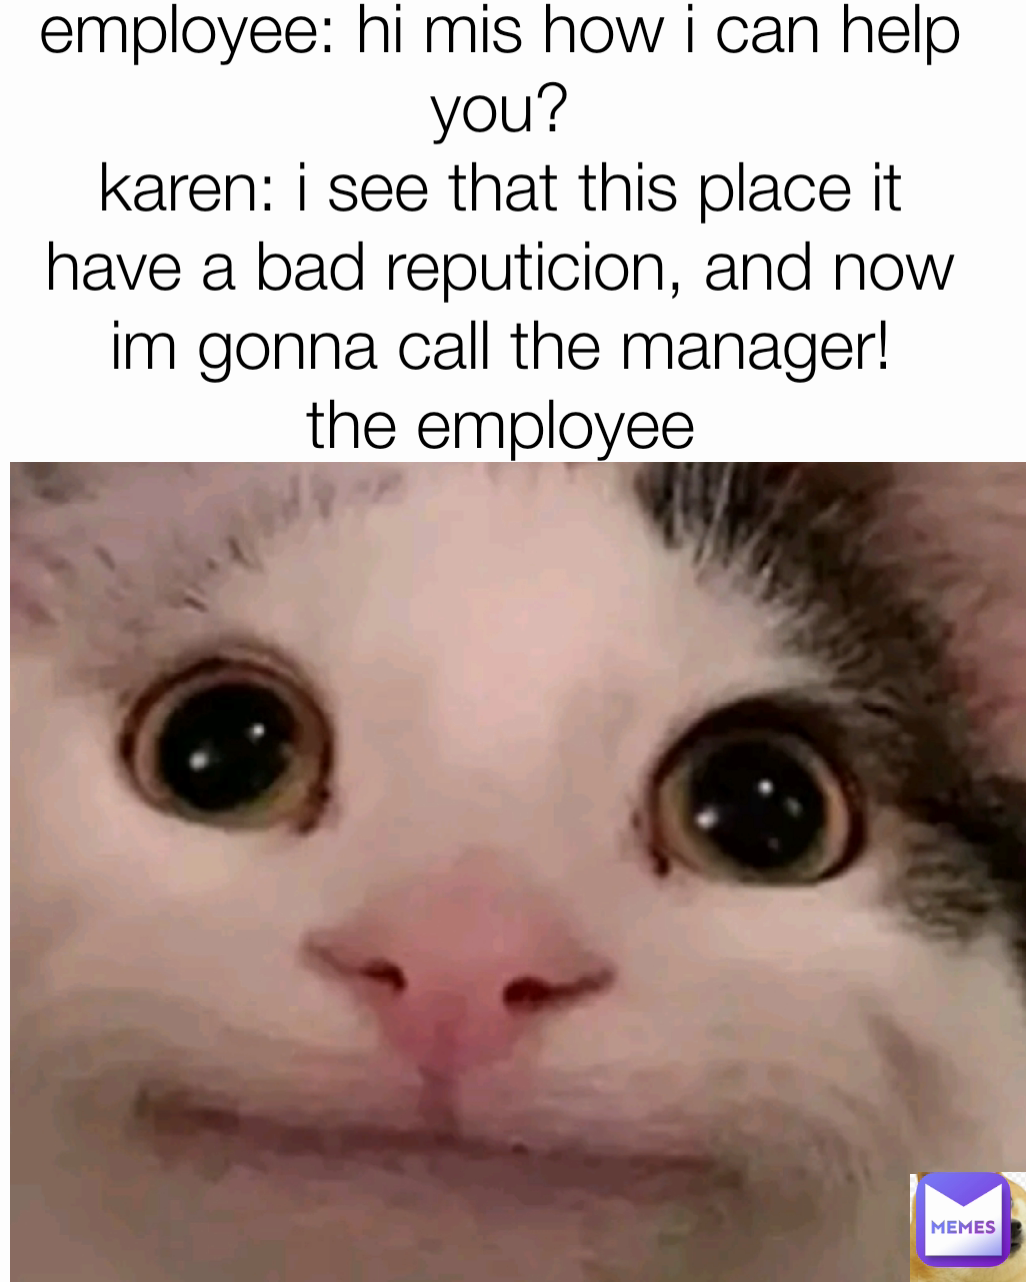 employee: hi mis how i can help you?
karen: i see that this place it have a bad reputicion, and now im gonna call the manager!
the employee